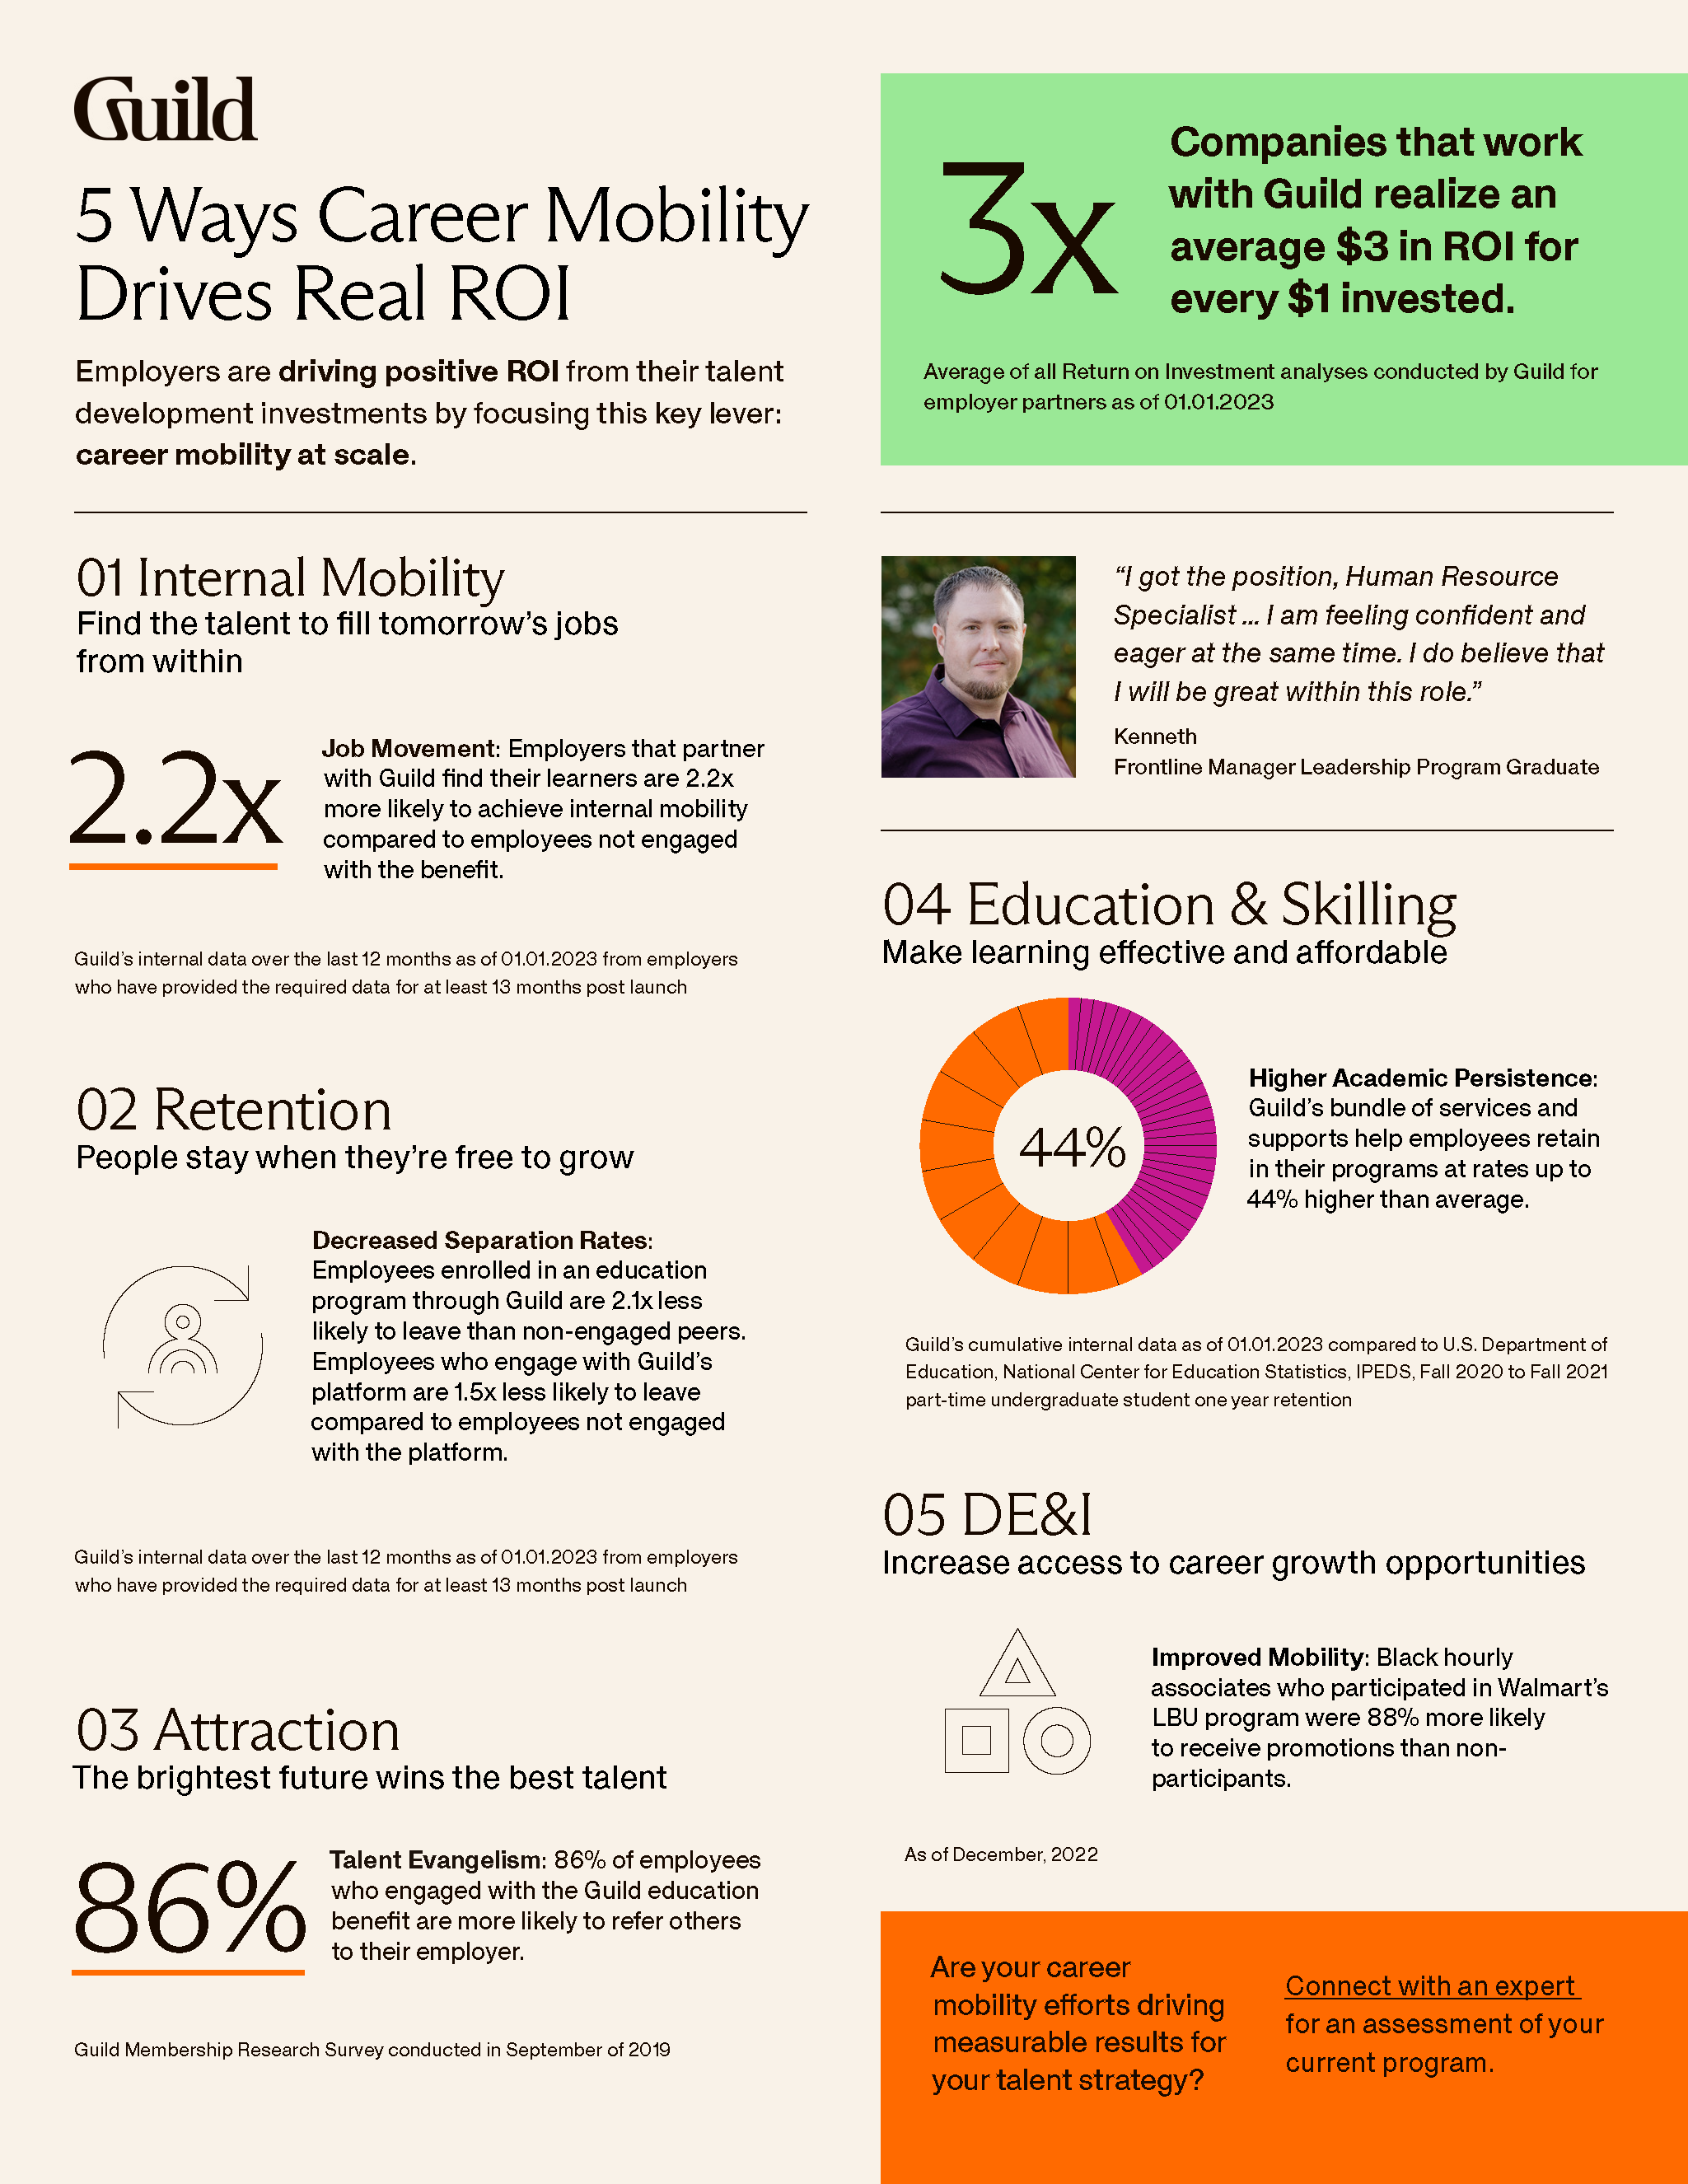 Infographic on the 5 ways career mobility drives real ROI. Employers are driving positive ROI from their talent development investments by focusing this key lever: career mobility at scale. Companies that work with Guild realize an average $3 in ROI for every $1 invested. 1. Internal Mobility: Employers that partner with Guild find their learners are 2.2x more likely to achieve internal mobility compared to employees not engaged with the benefit. 2. Retention: Employees enrolled in an education program through Guild are 2.1x less likely to leave than non-engaged peers. Employees who engage with Guild’s platform are 1.5x less likely to leave compared to employees not engaged with the platform. 3. Attraction: 86% of employees who engaged with the Guild education benefit are more likely to refer others to their employer. 4. Education & Skilling: Guild’s bundle of services and supports help employees retain in their programs up to 44% higher than average. 5. DE&I: Black hourly associates who participated in Walmart’s LBU program were 88% more likely to receive promotions than non-participants.